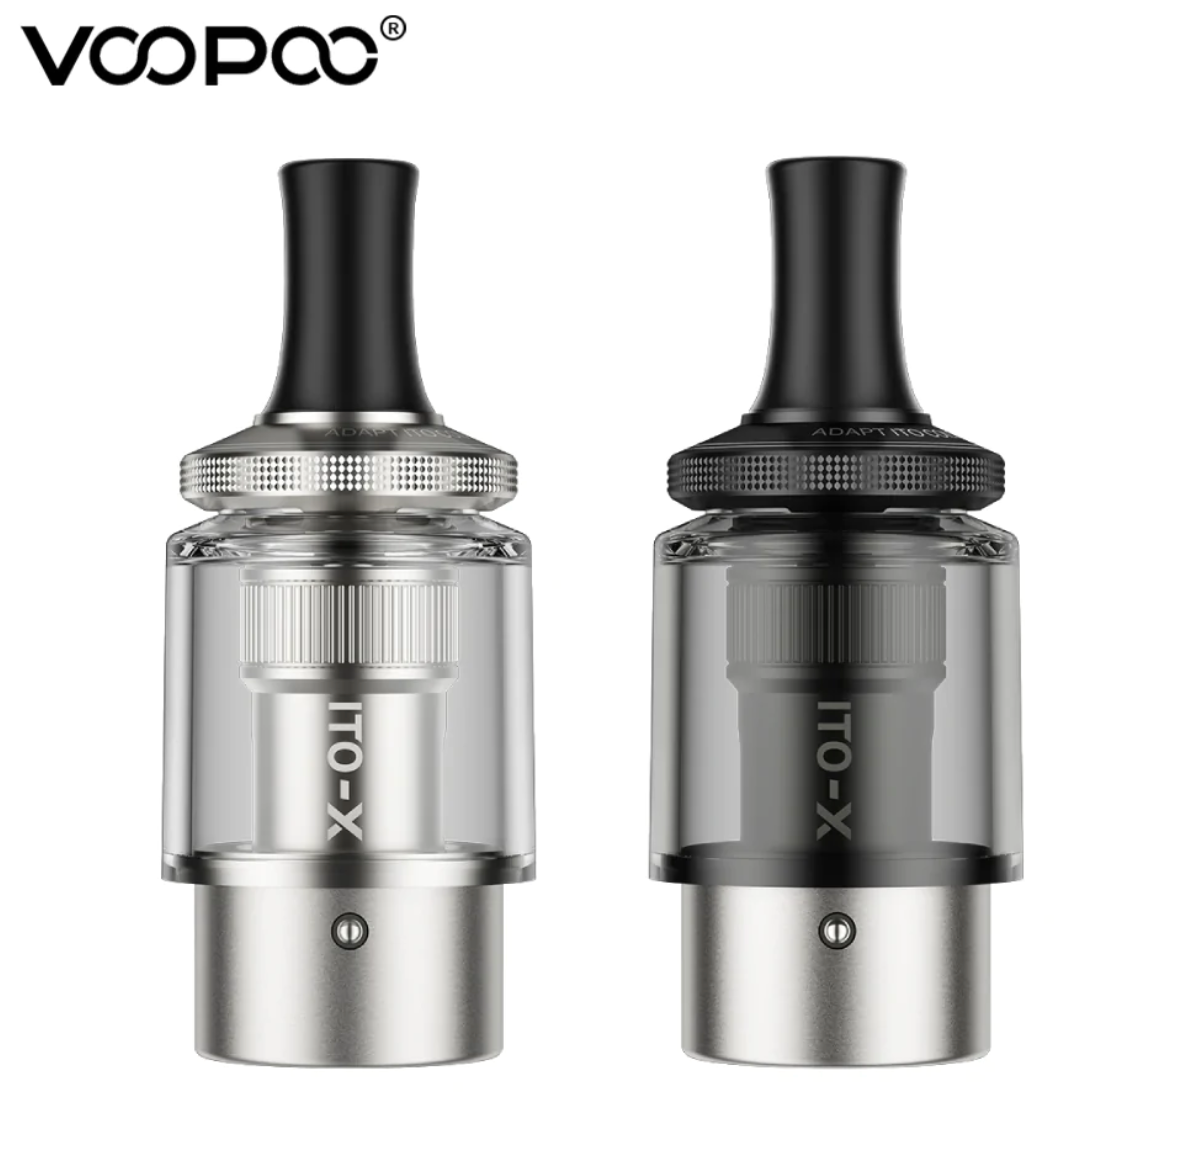 VOOPOO ITO-X POD Hardware - Storm Chaser